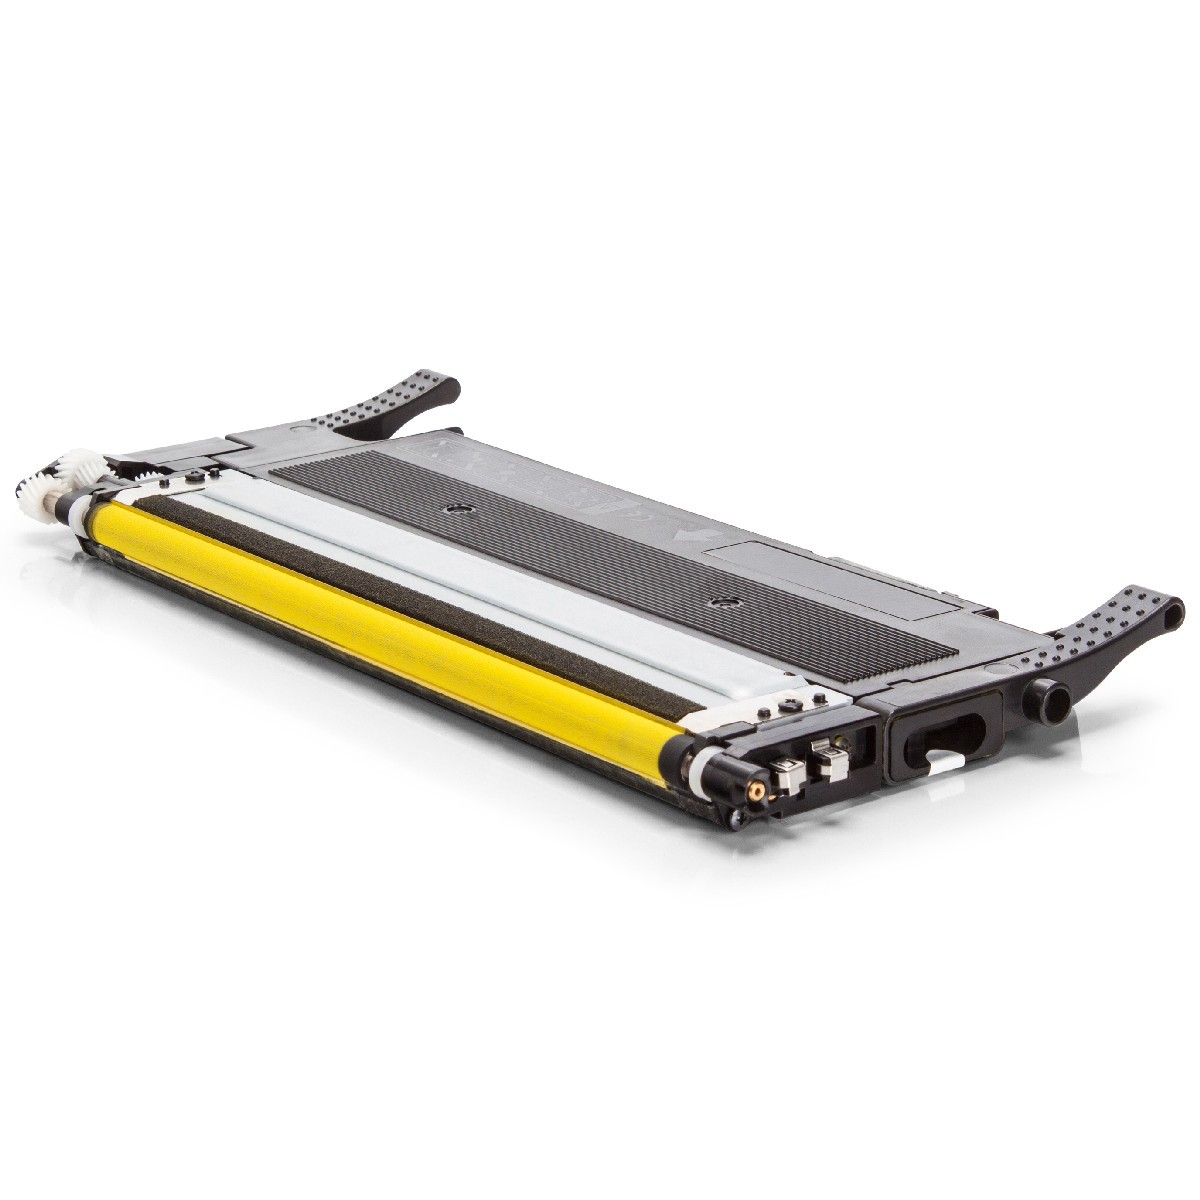 Toner HP Συμβατό 117A BK W2070A ΧΩΡΙΣ CHIP Σελίδες:700 Yellow για 150a, 150nw, 178fnw, 178nw, 178nwg, 179fnw, 179nw, 179nwg